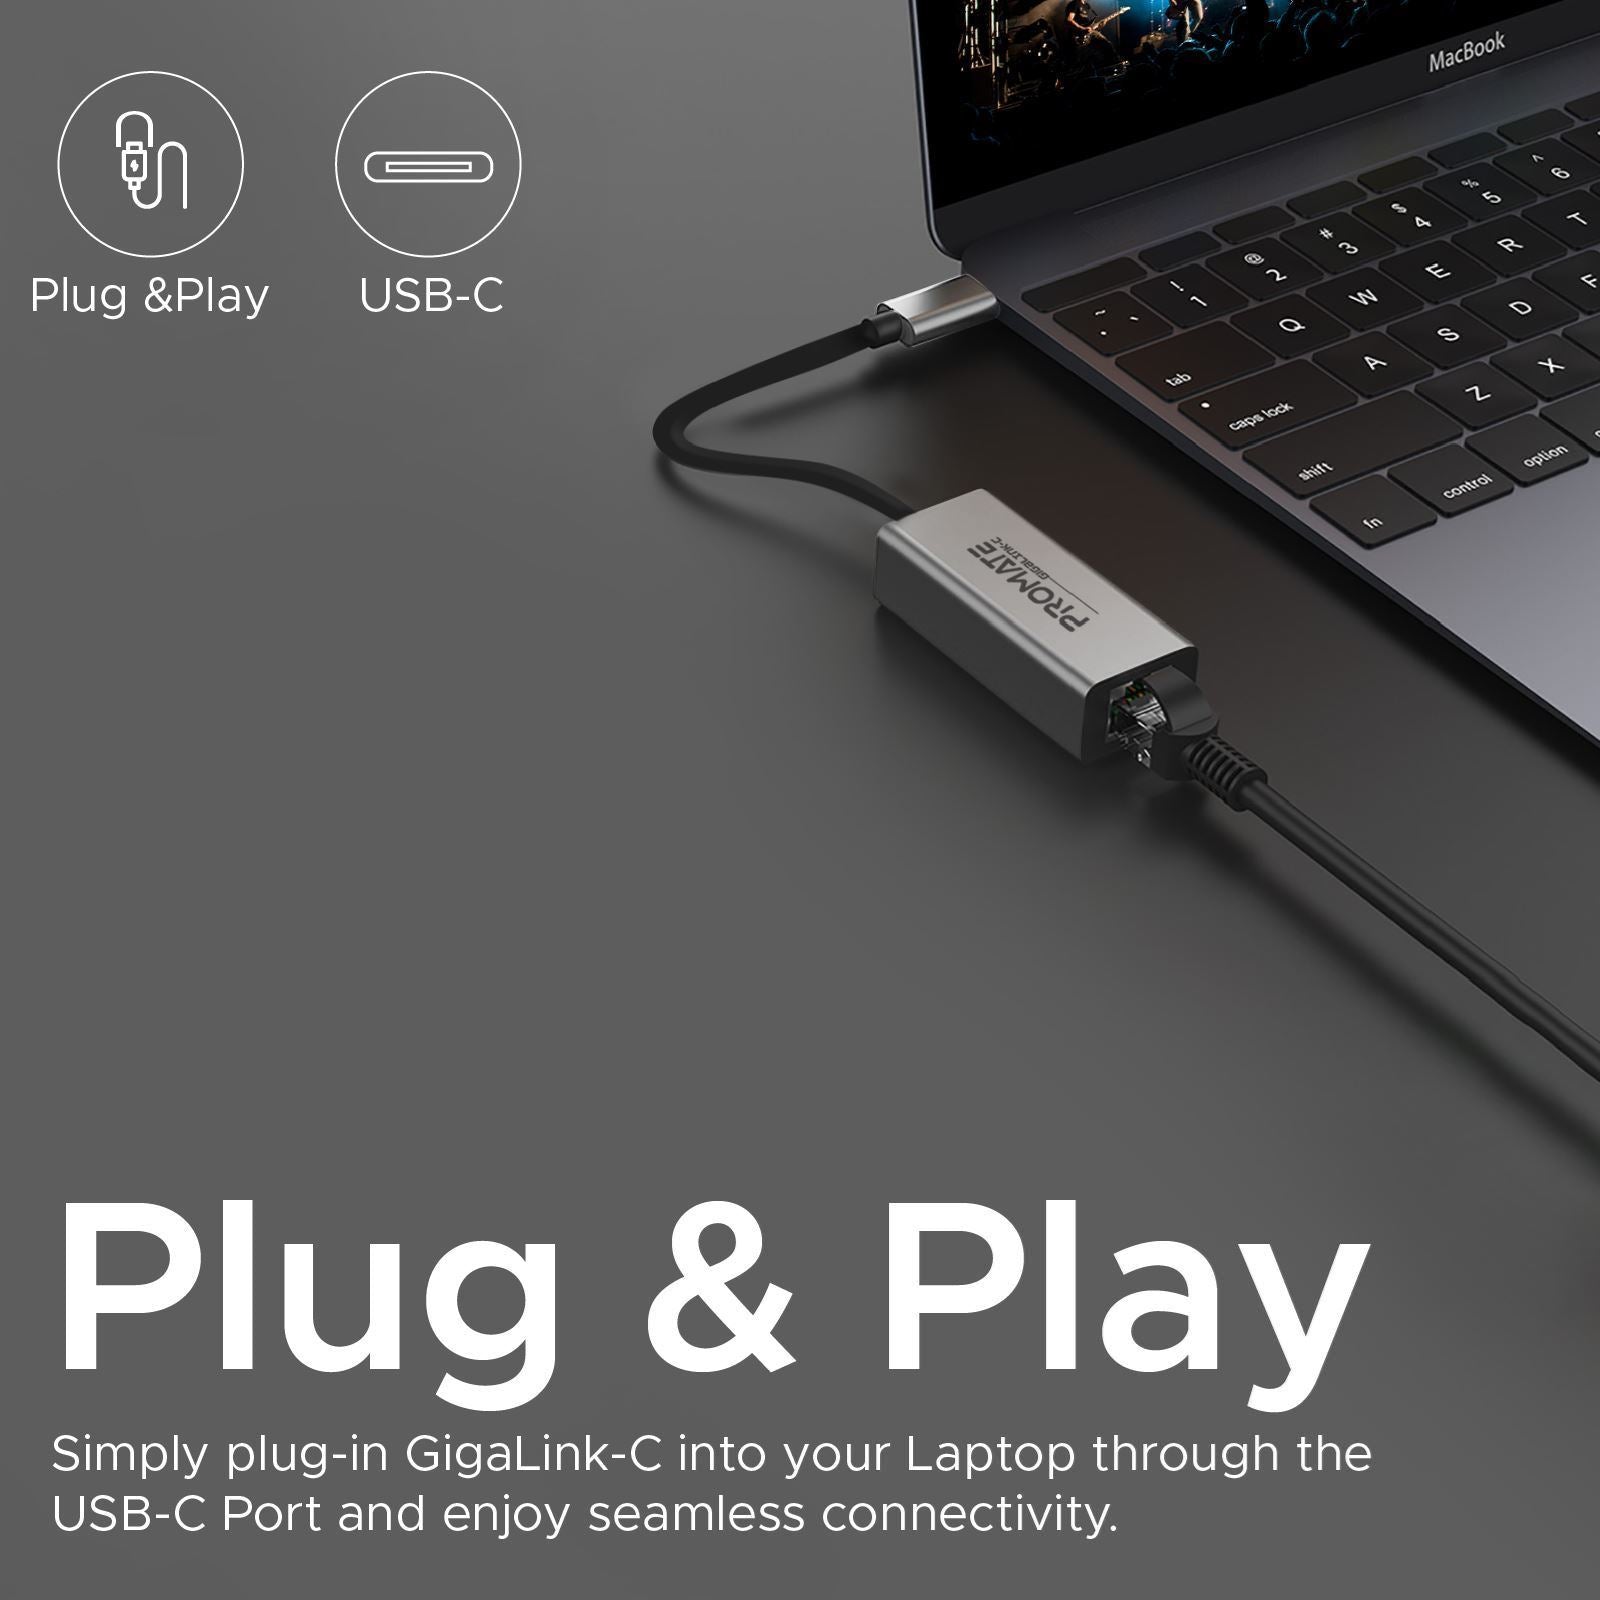 PROMATE_High_Speed_USB-C_to_RJ45_Gigabit_Ethernet_Adapter._Compact_Design,_Premuim_Aluminum_Alloy,_Supports_All_USB-C_Devices_such_as_Laptops,_Tablets,_&_Mobiles._Plug_&_Play._Grey_Colour. 1320